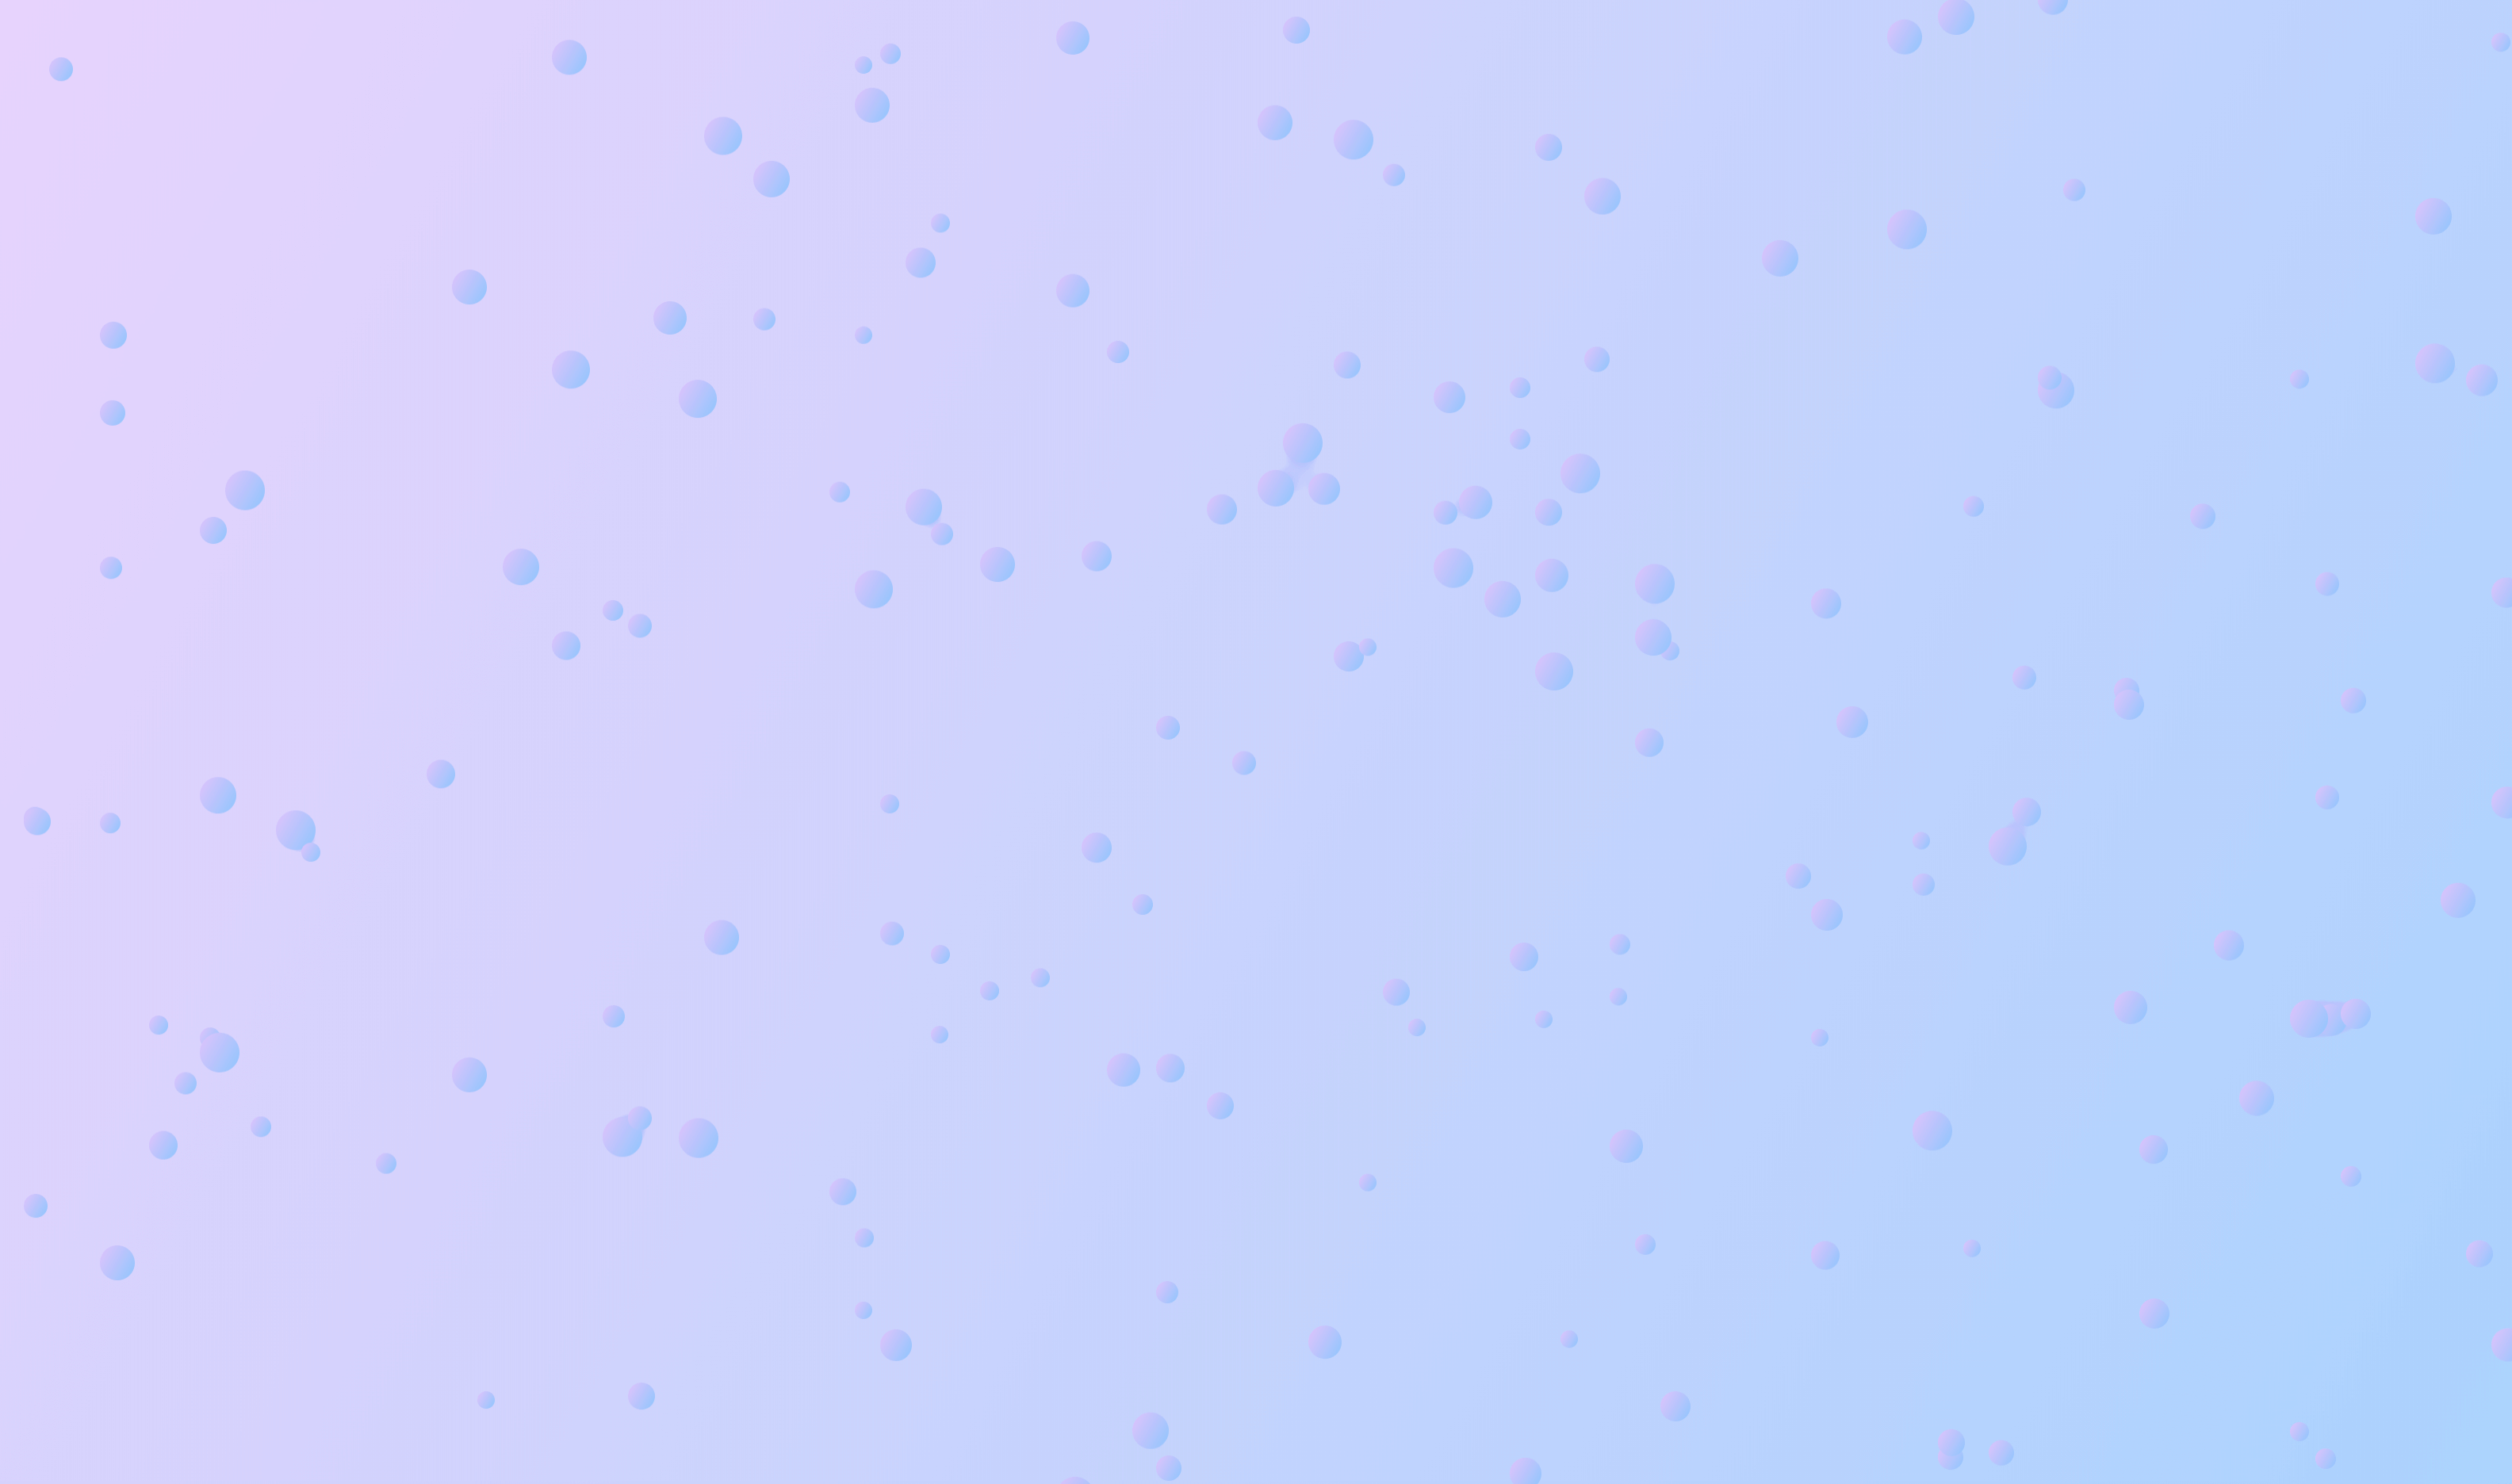 CSS Particle Backgrounds